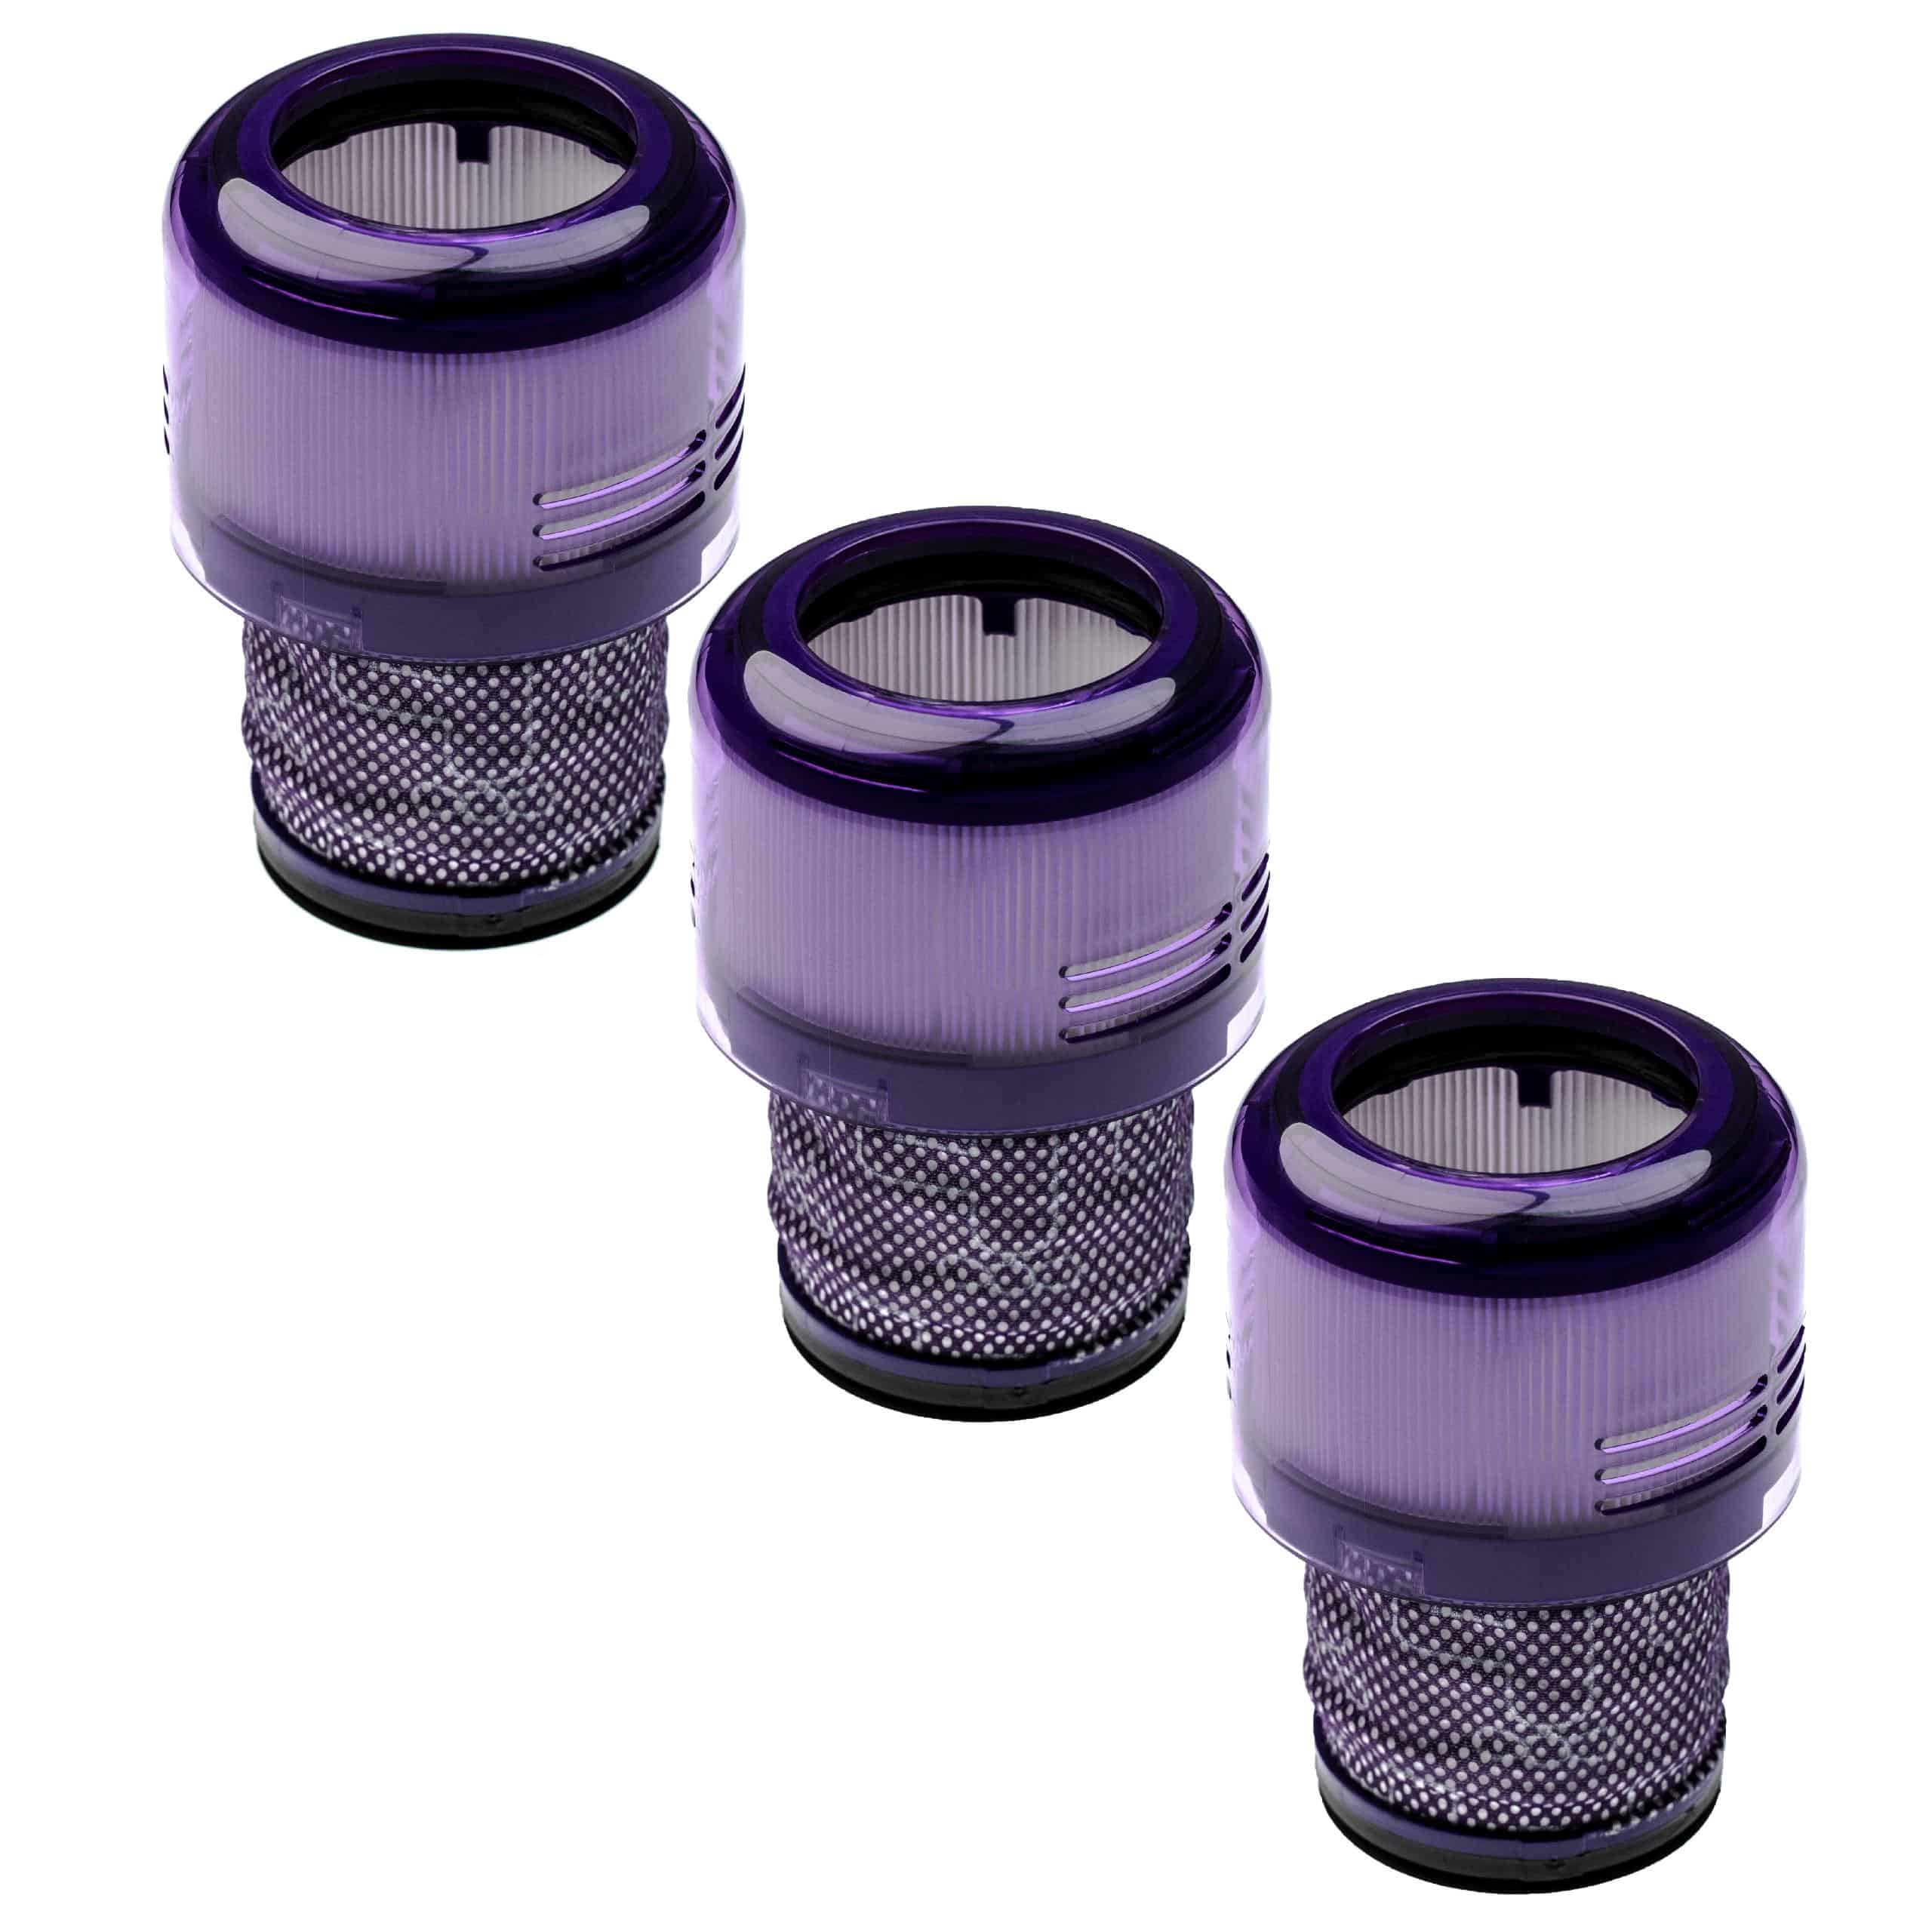 3x dust filter replaces Dyson 97001302, 970013-02 for DysonVacuum Cleaner